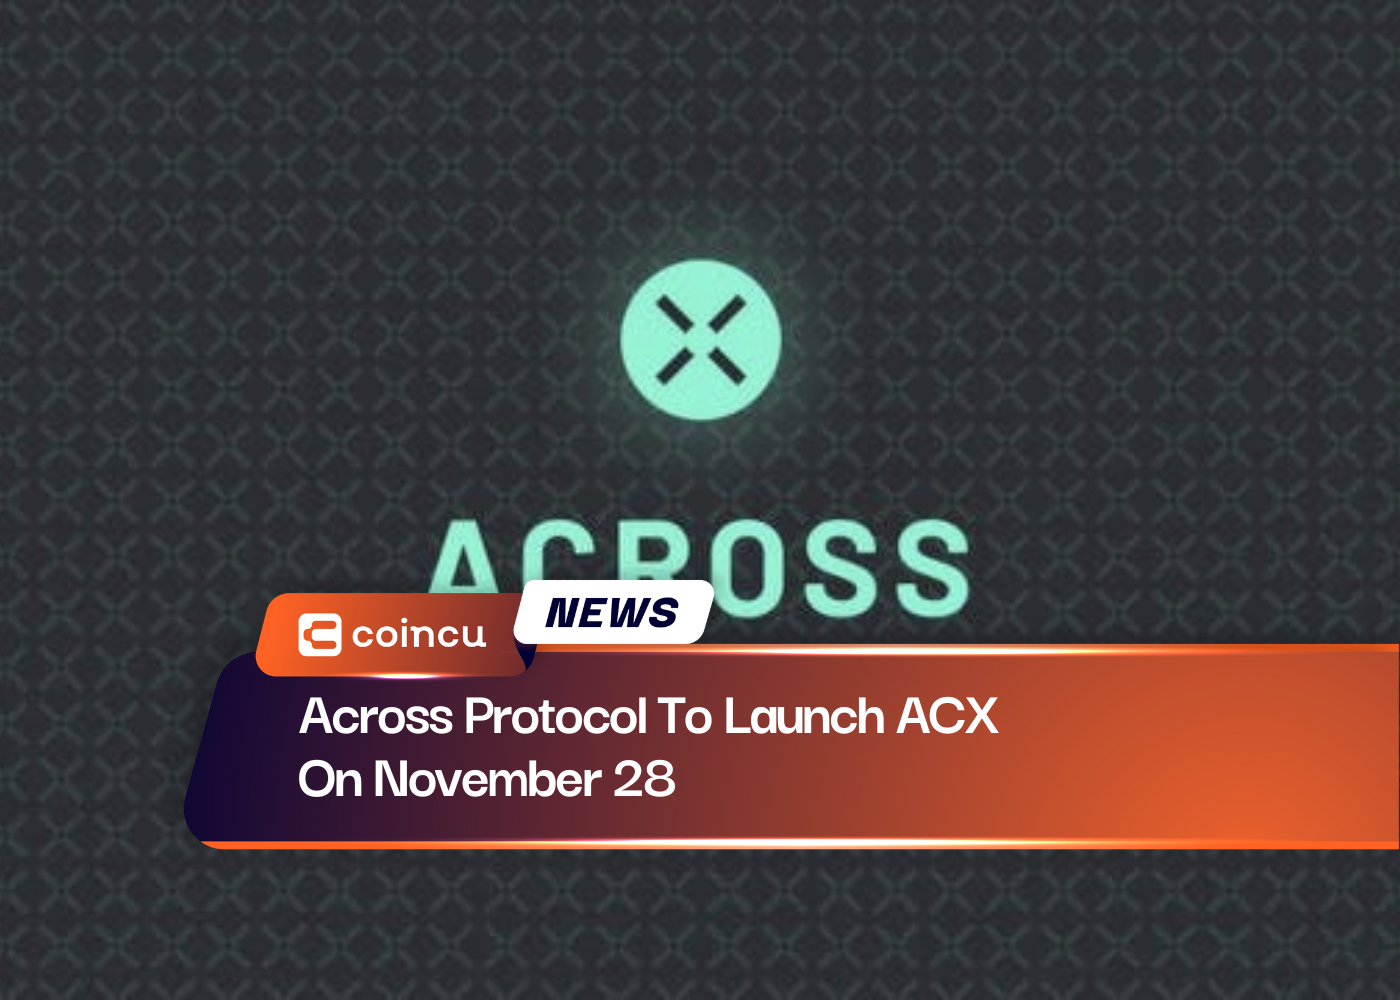 Across Protocol To Launch ACX On November 28